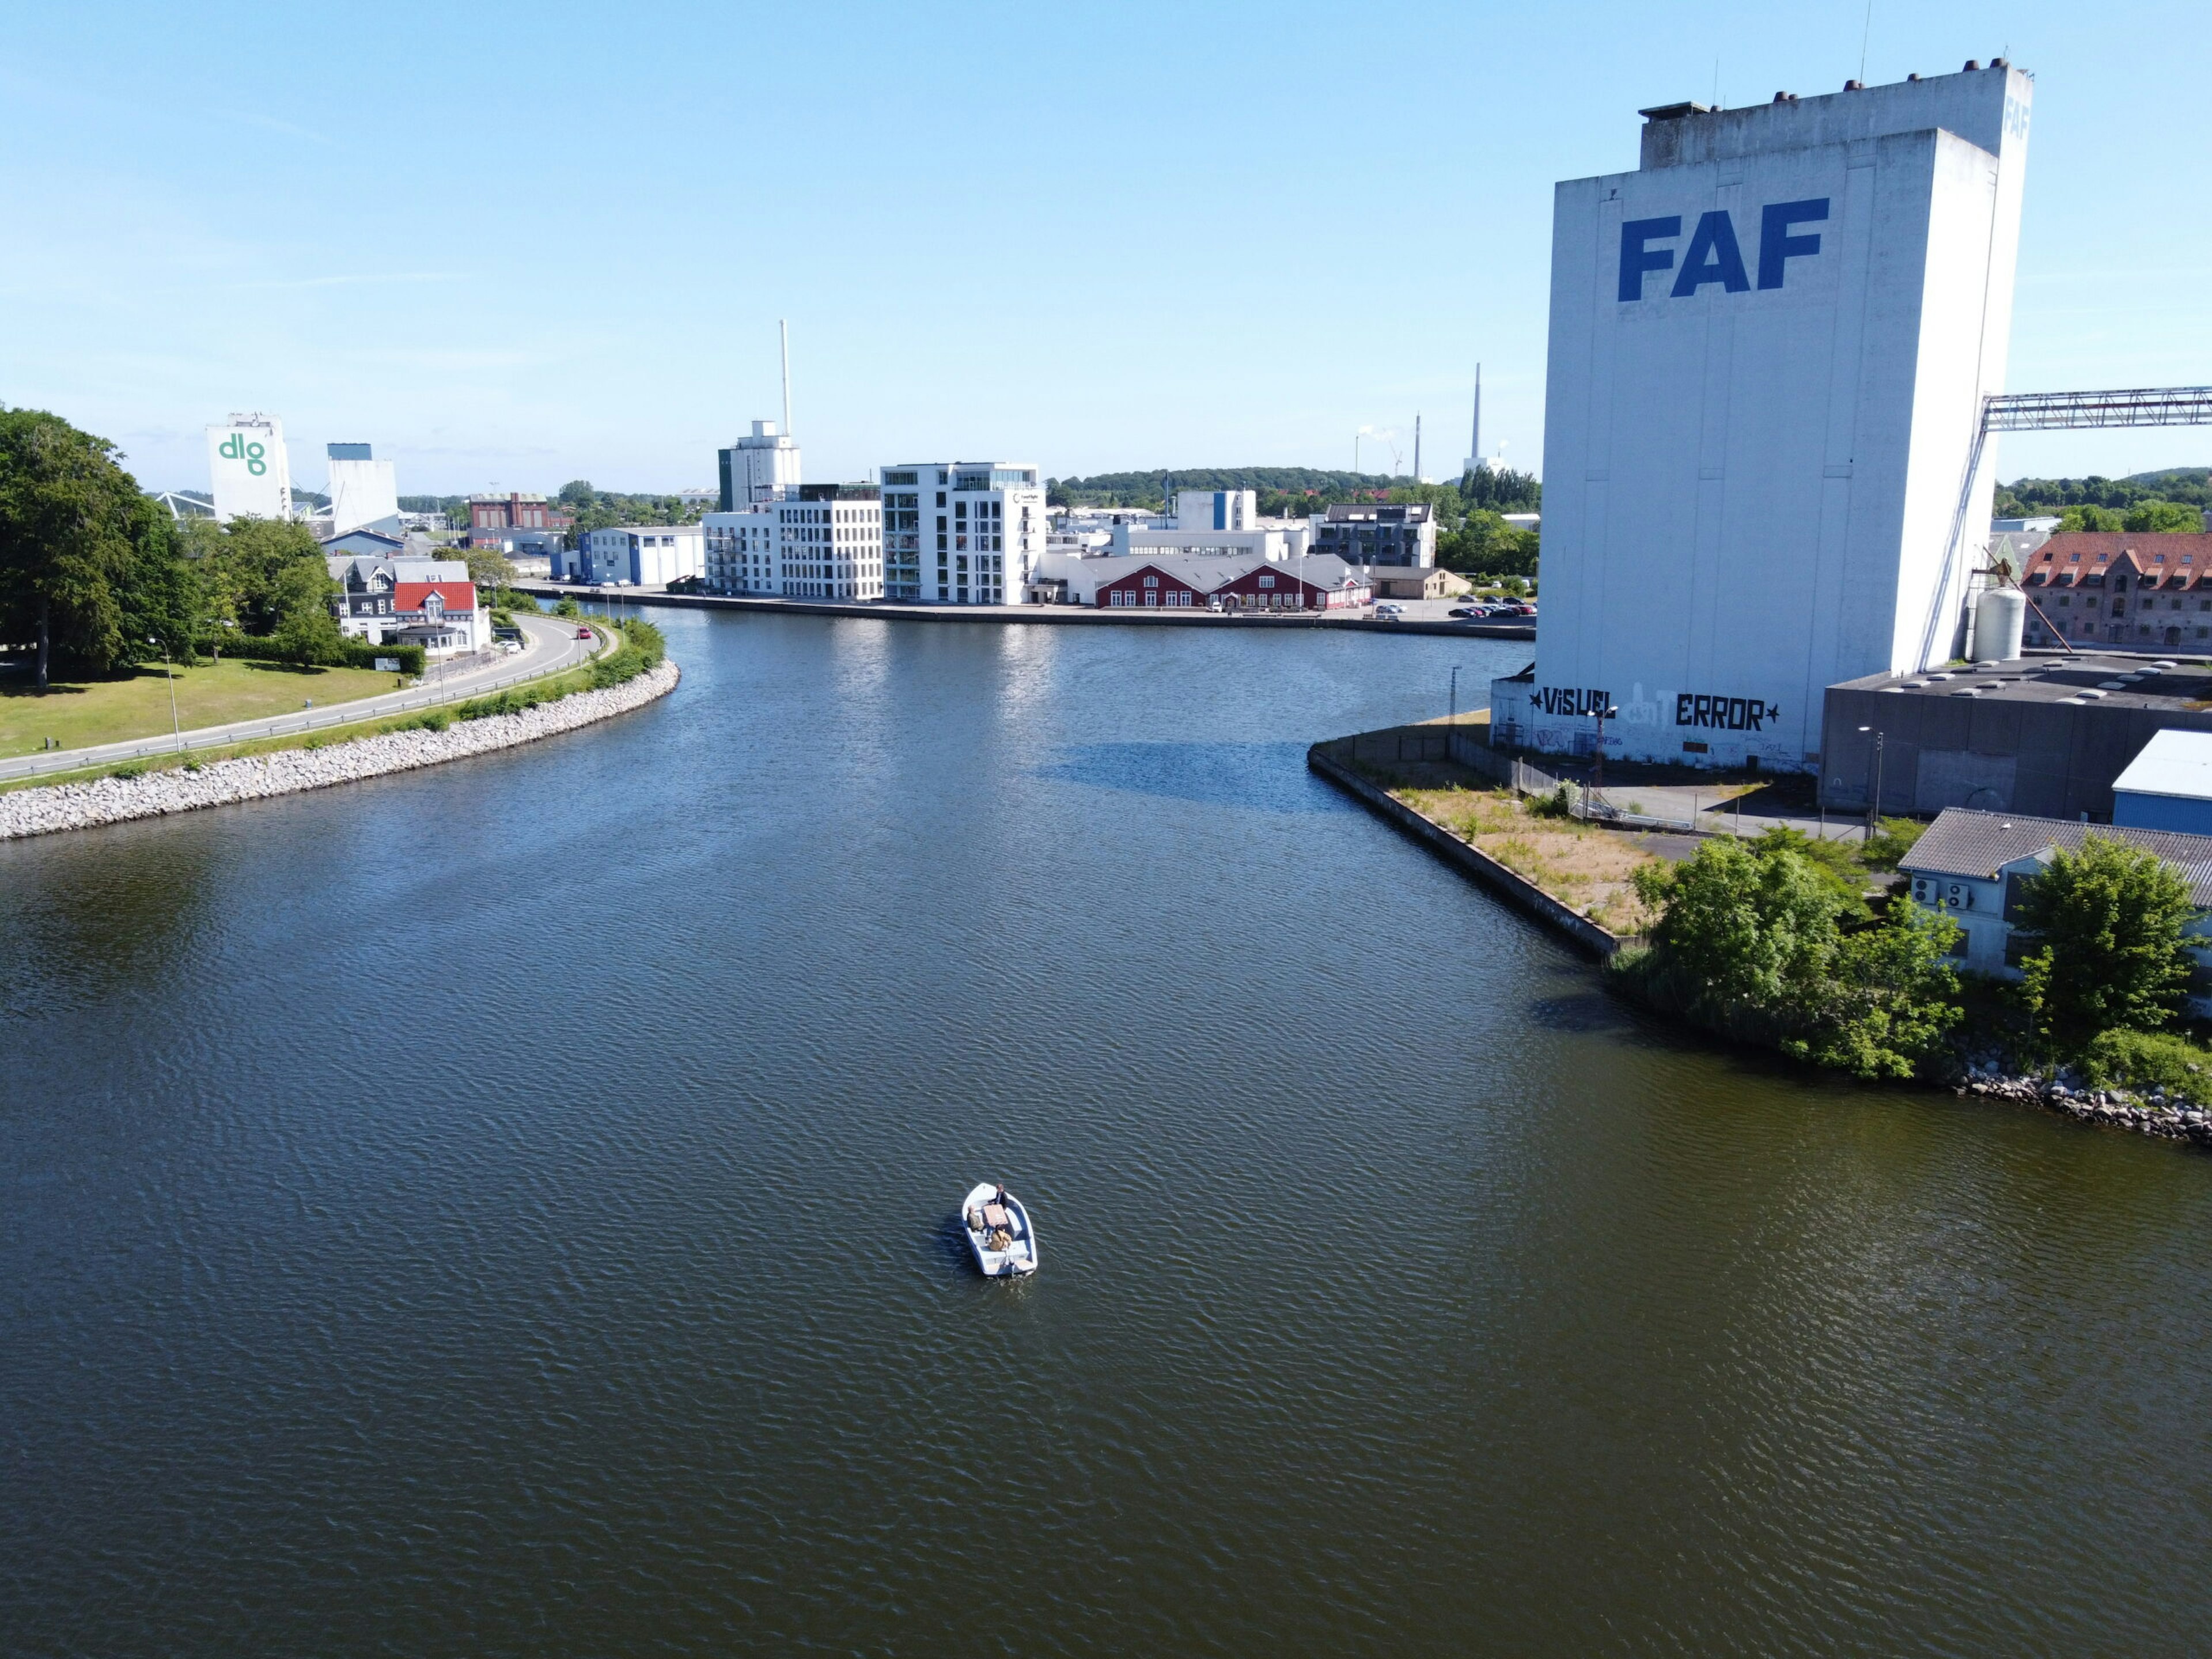 The FAF Building in Odense with a GoBoat